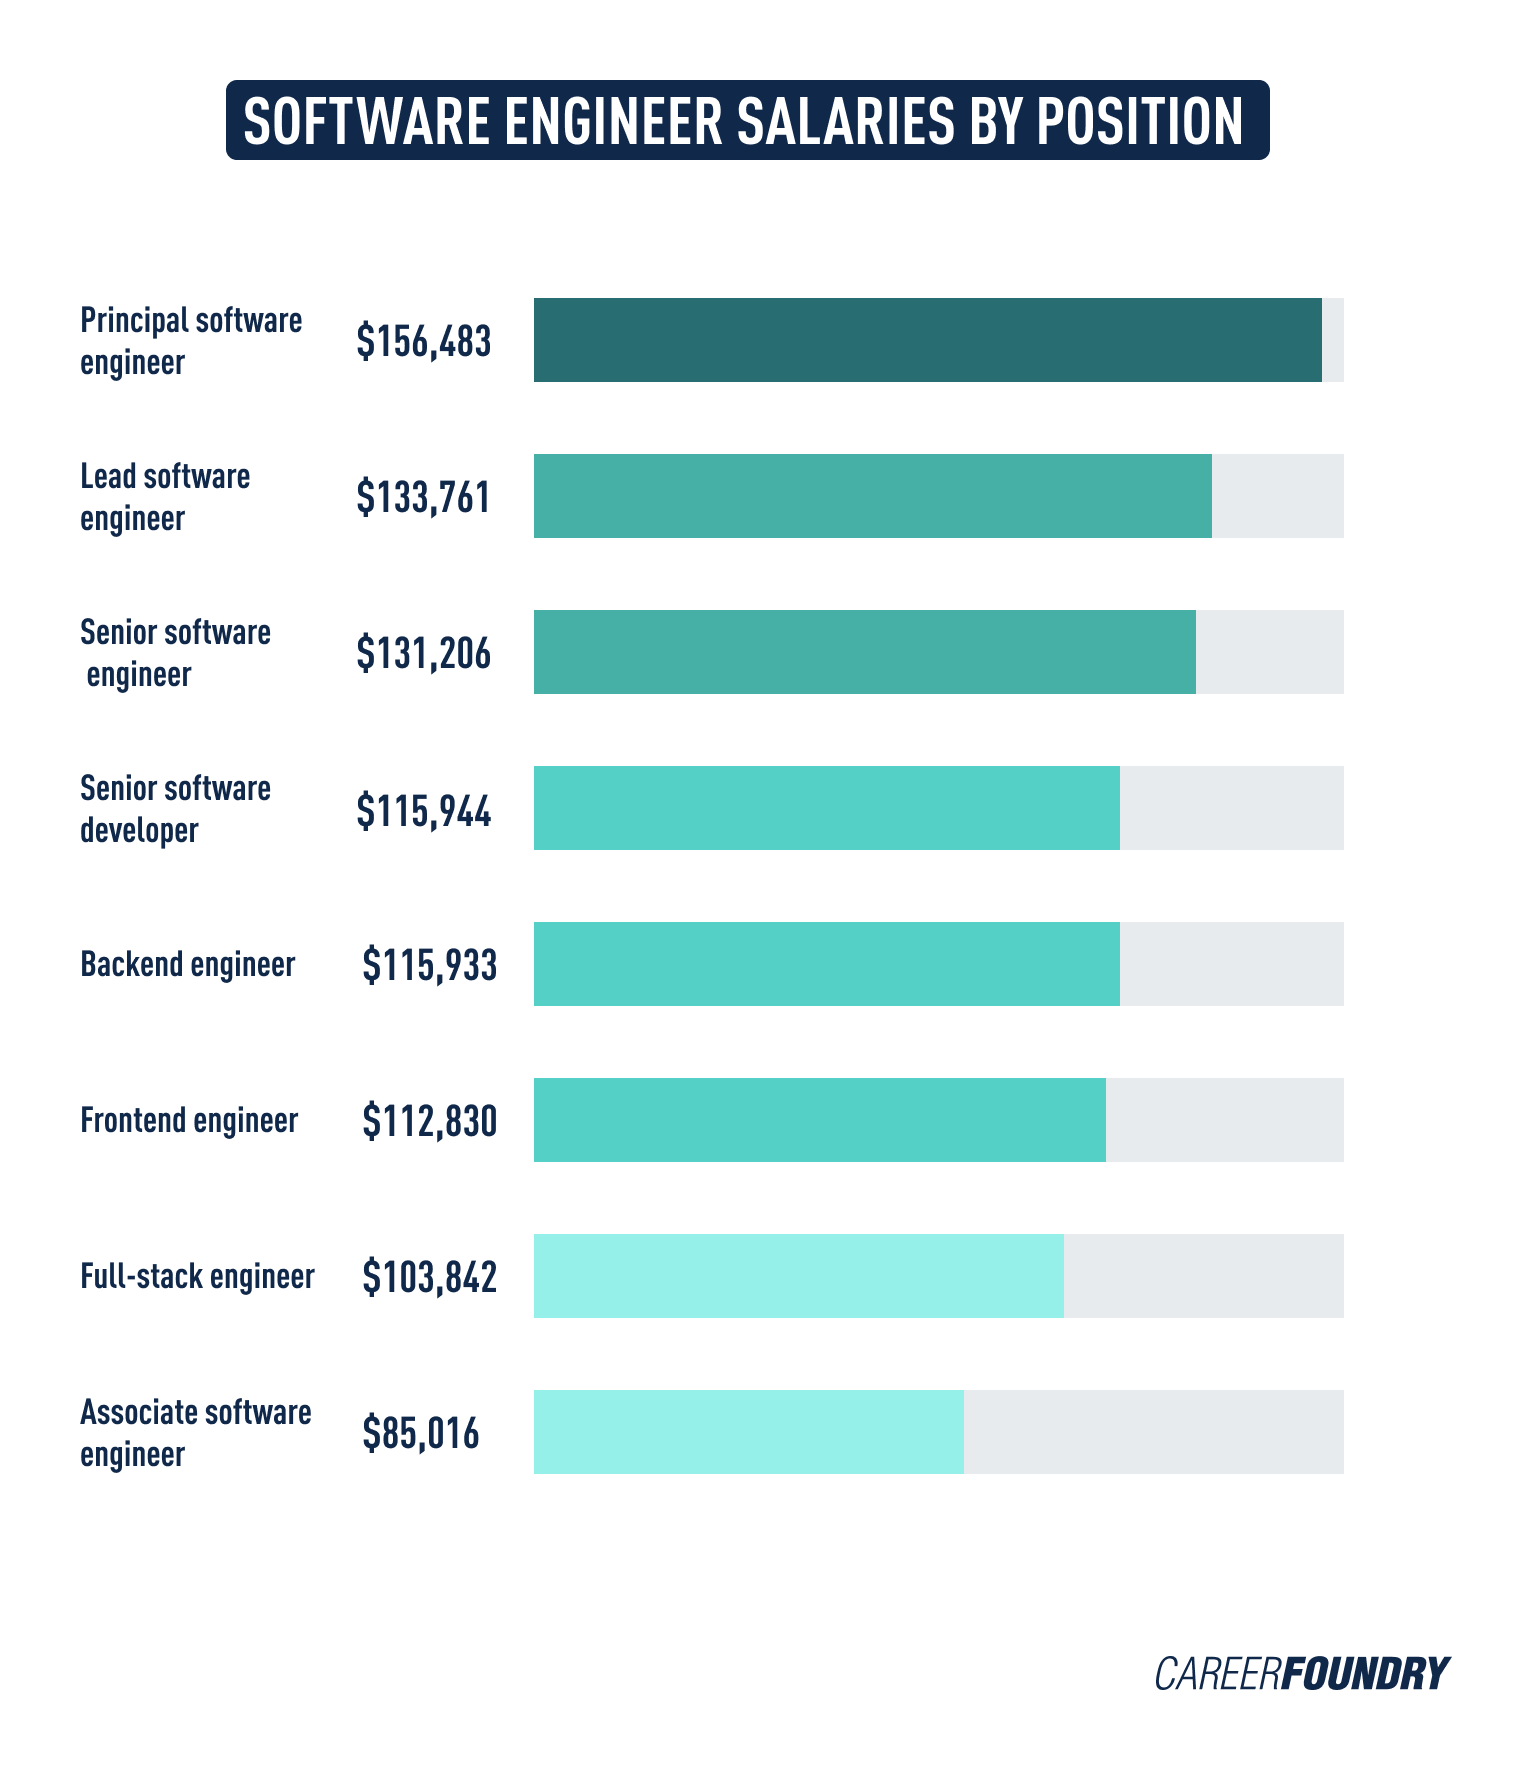 Software Engineer Salaries By Position.webp